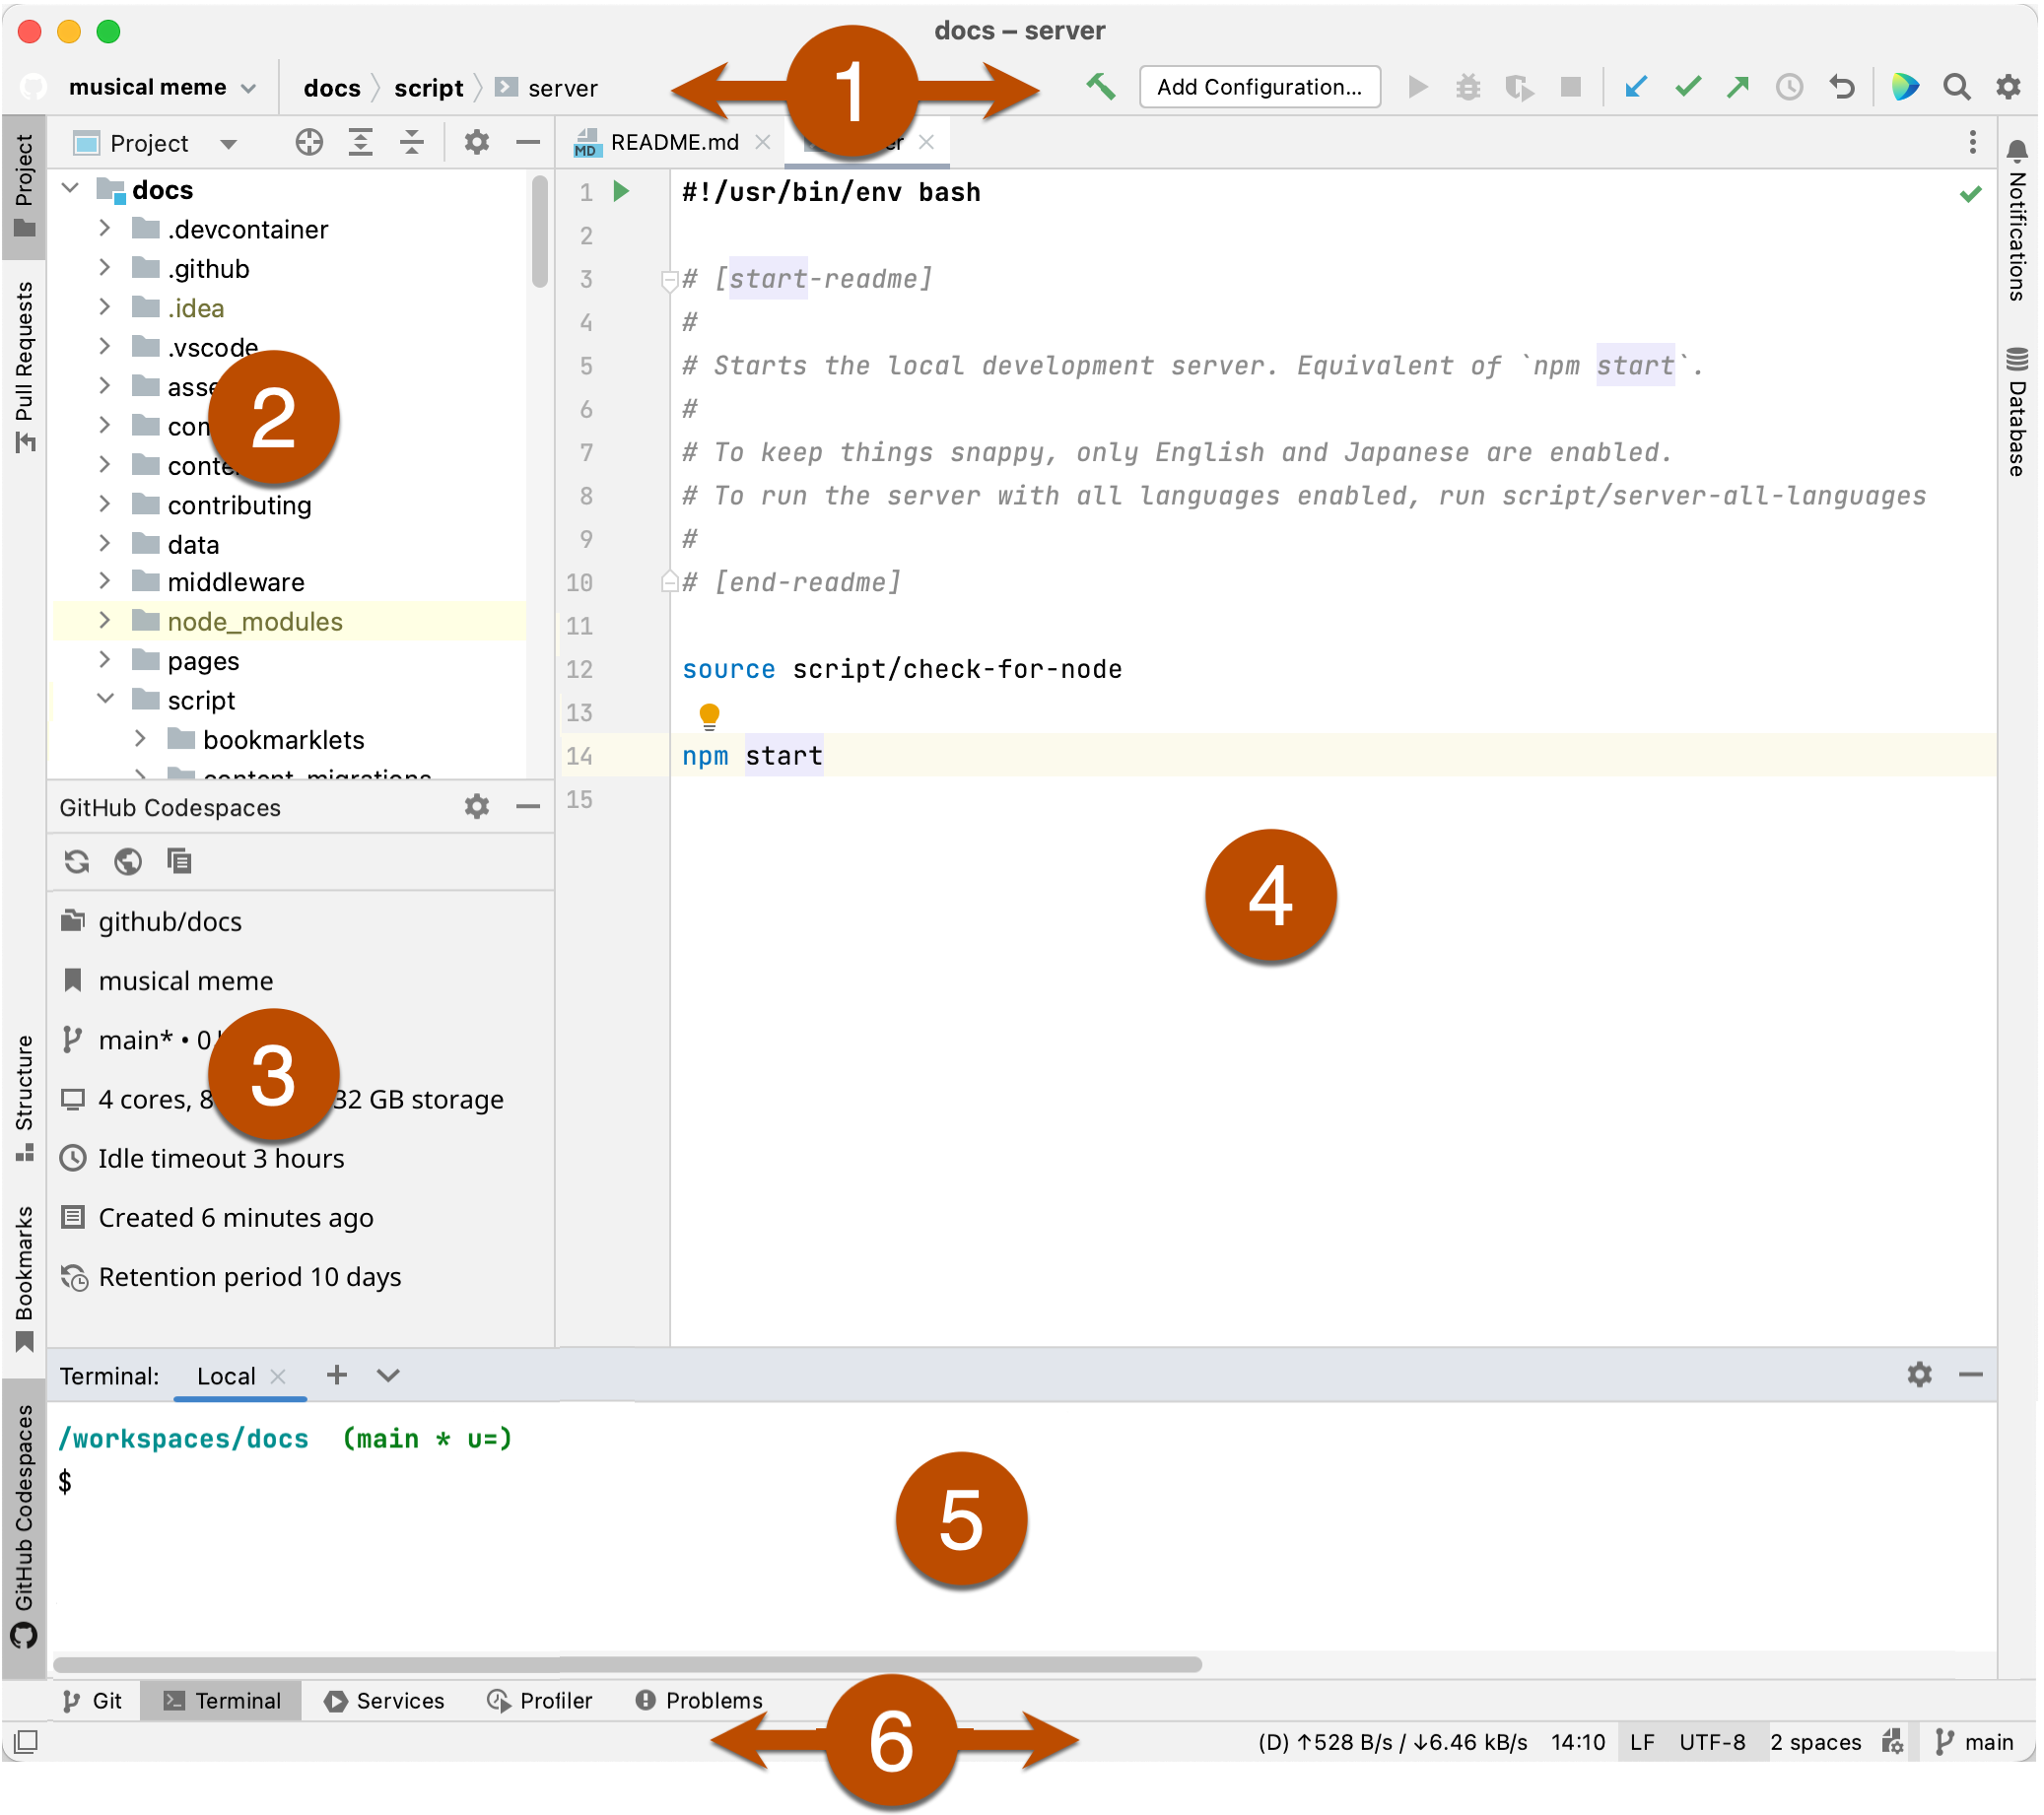 Annotated screenshot of the six main components of the user interface for JetBrains IntelliJ IDEA.